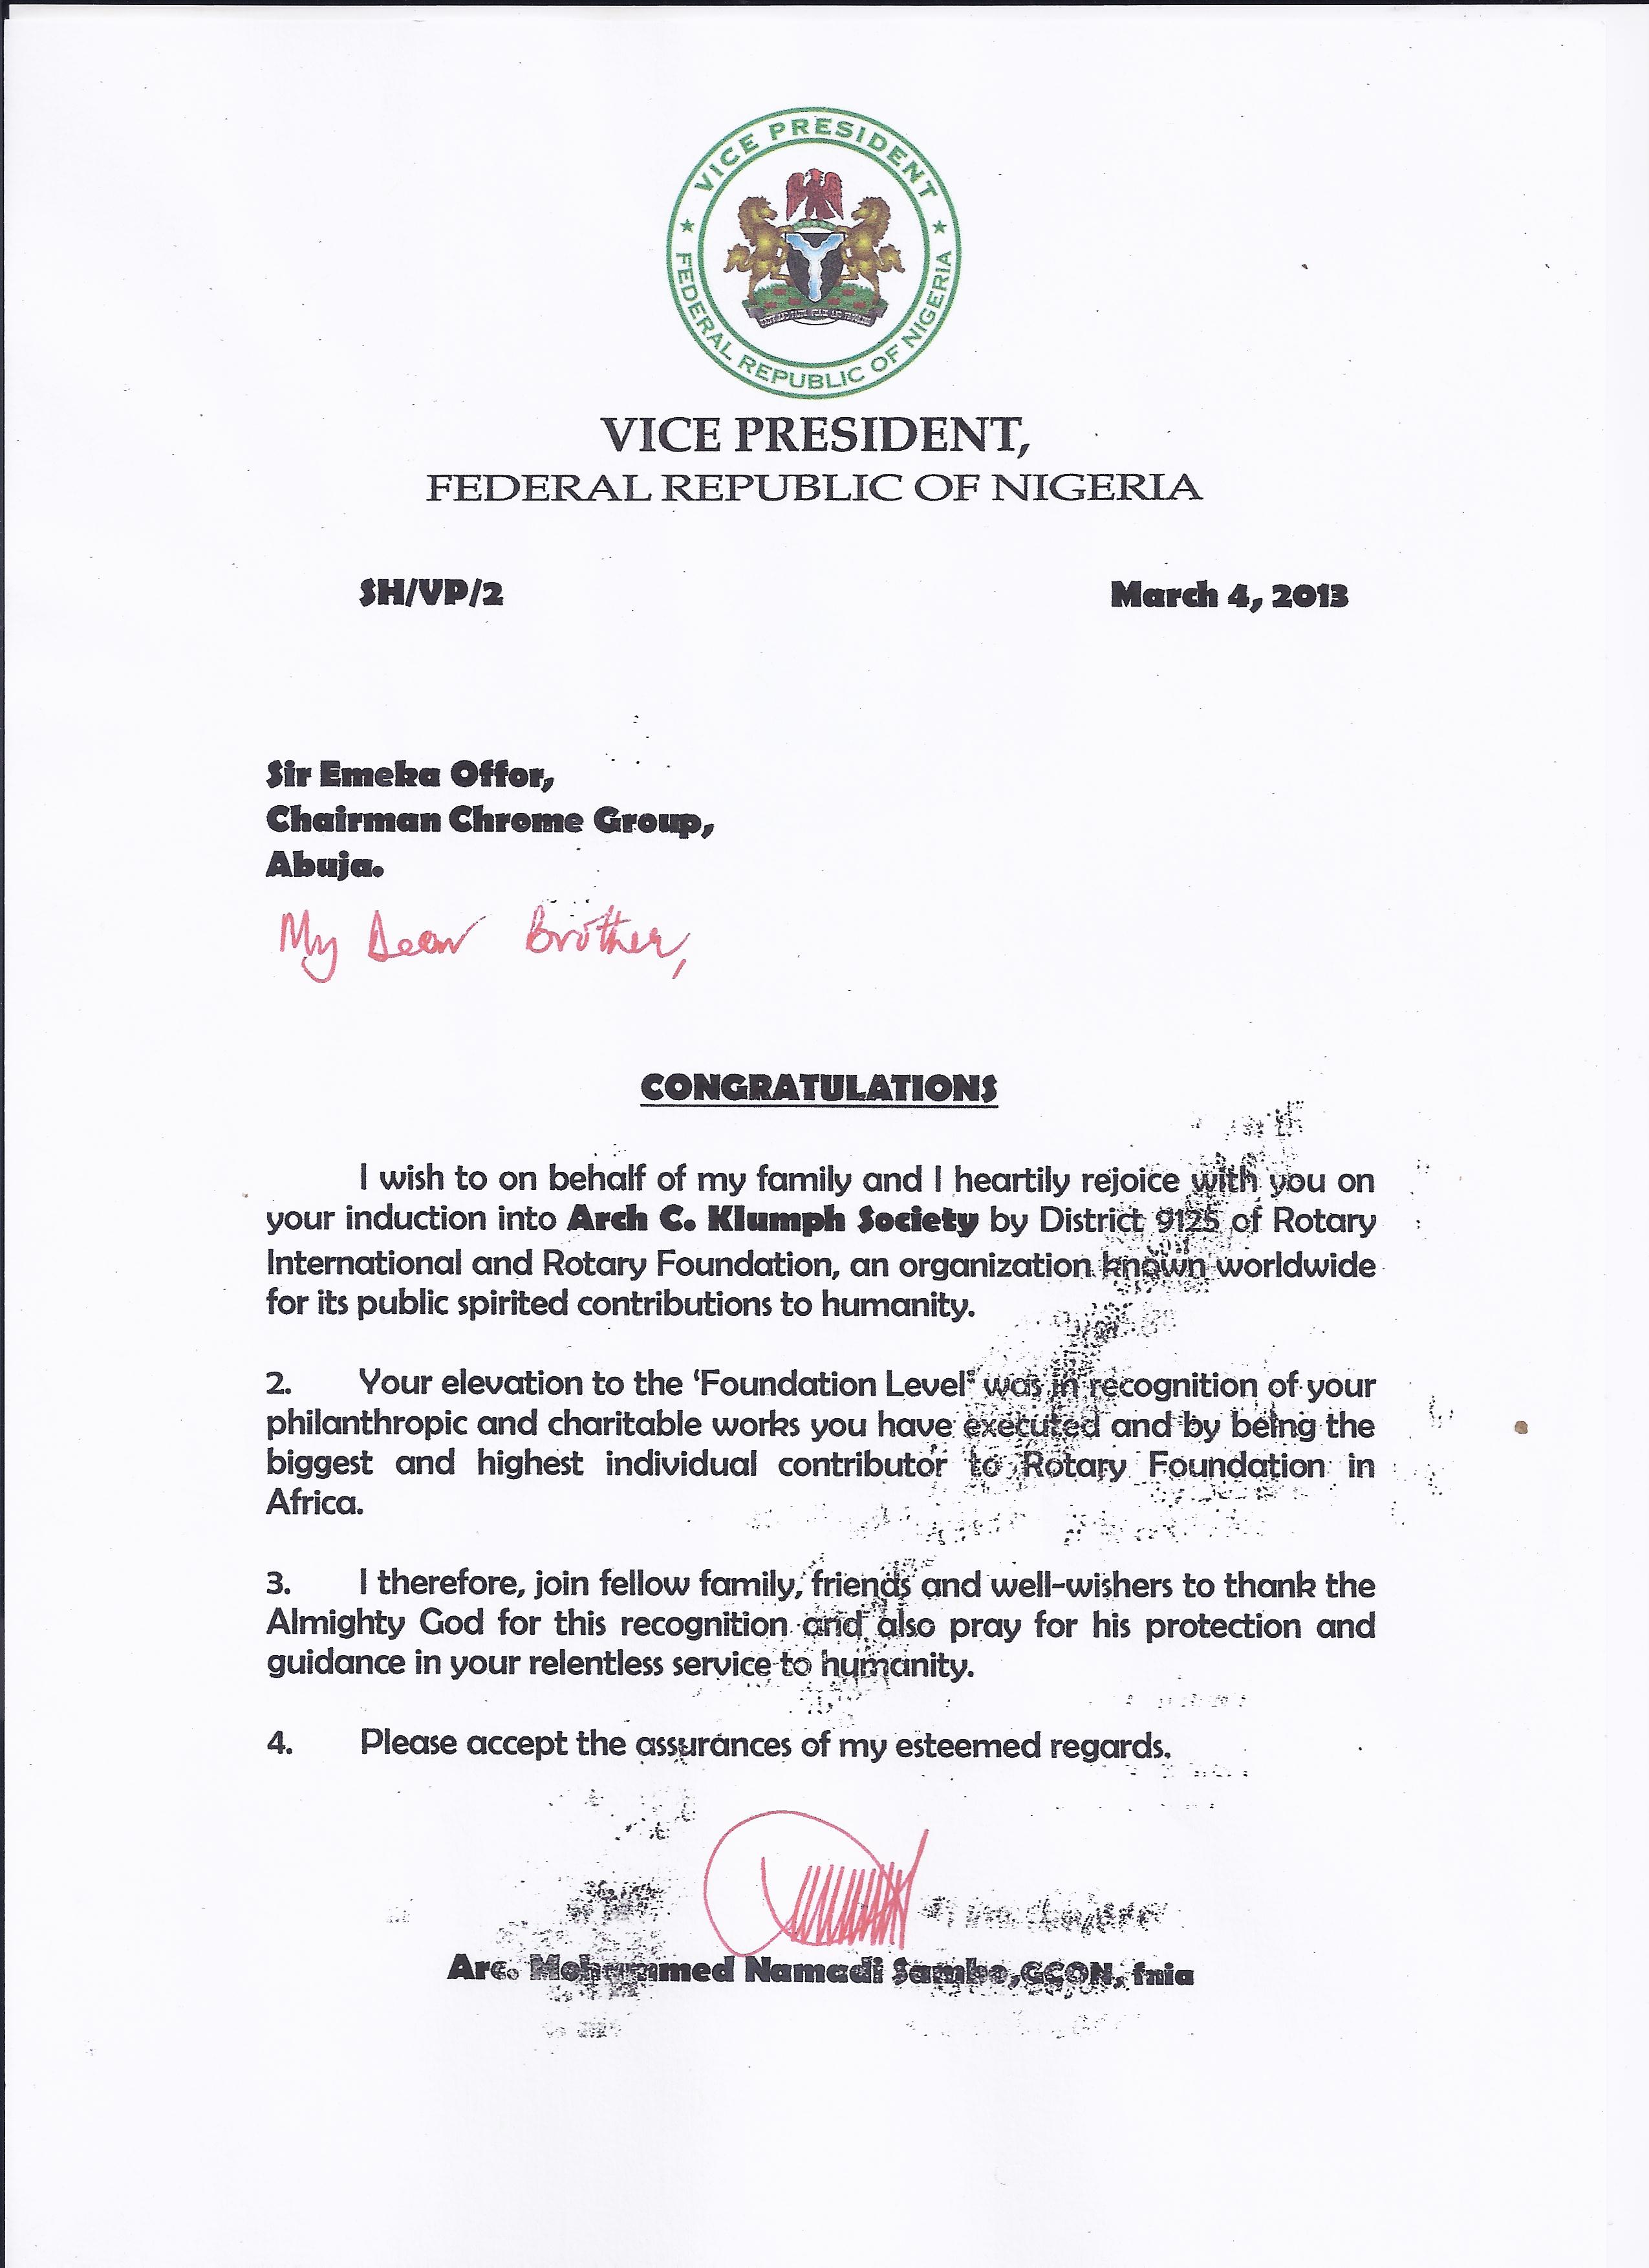 Letter from the Vice President of Nigeria